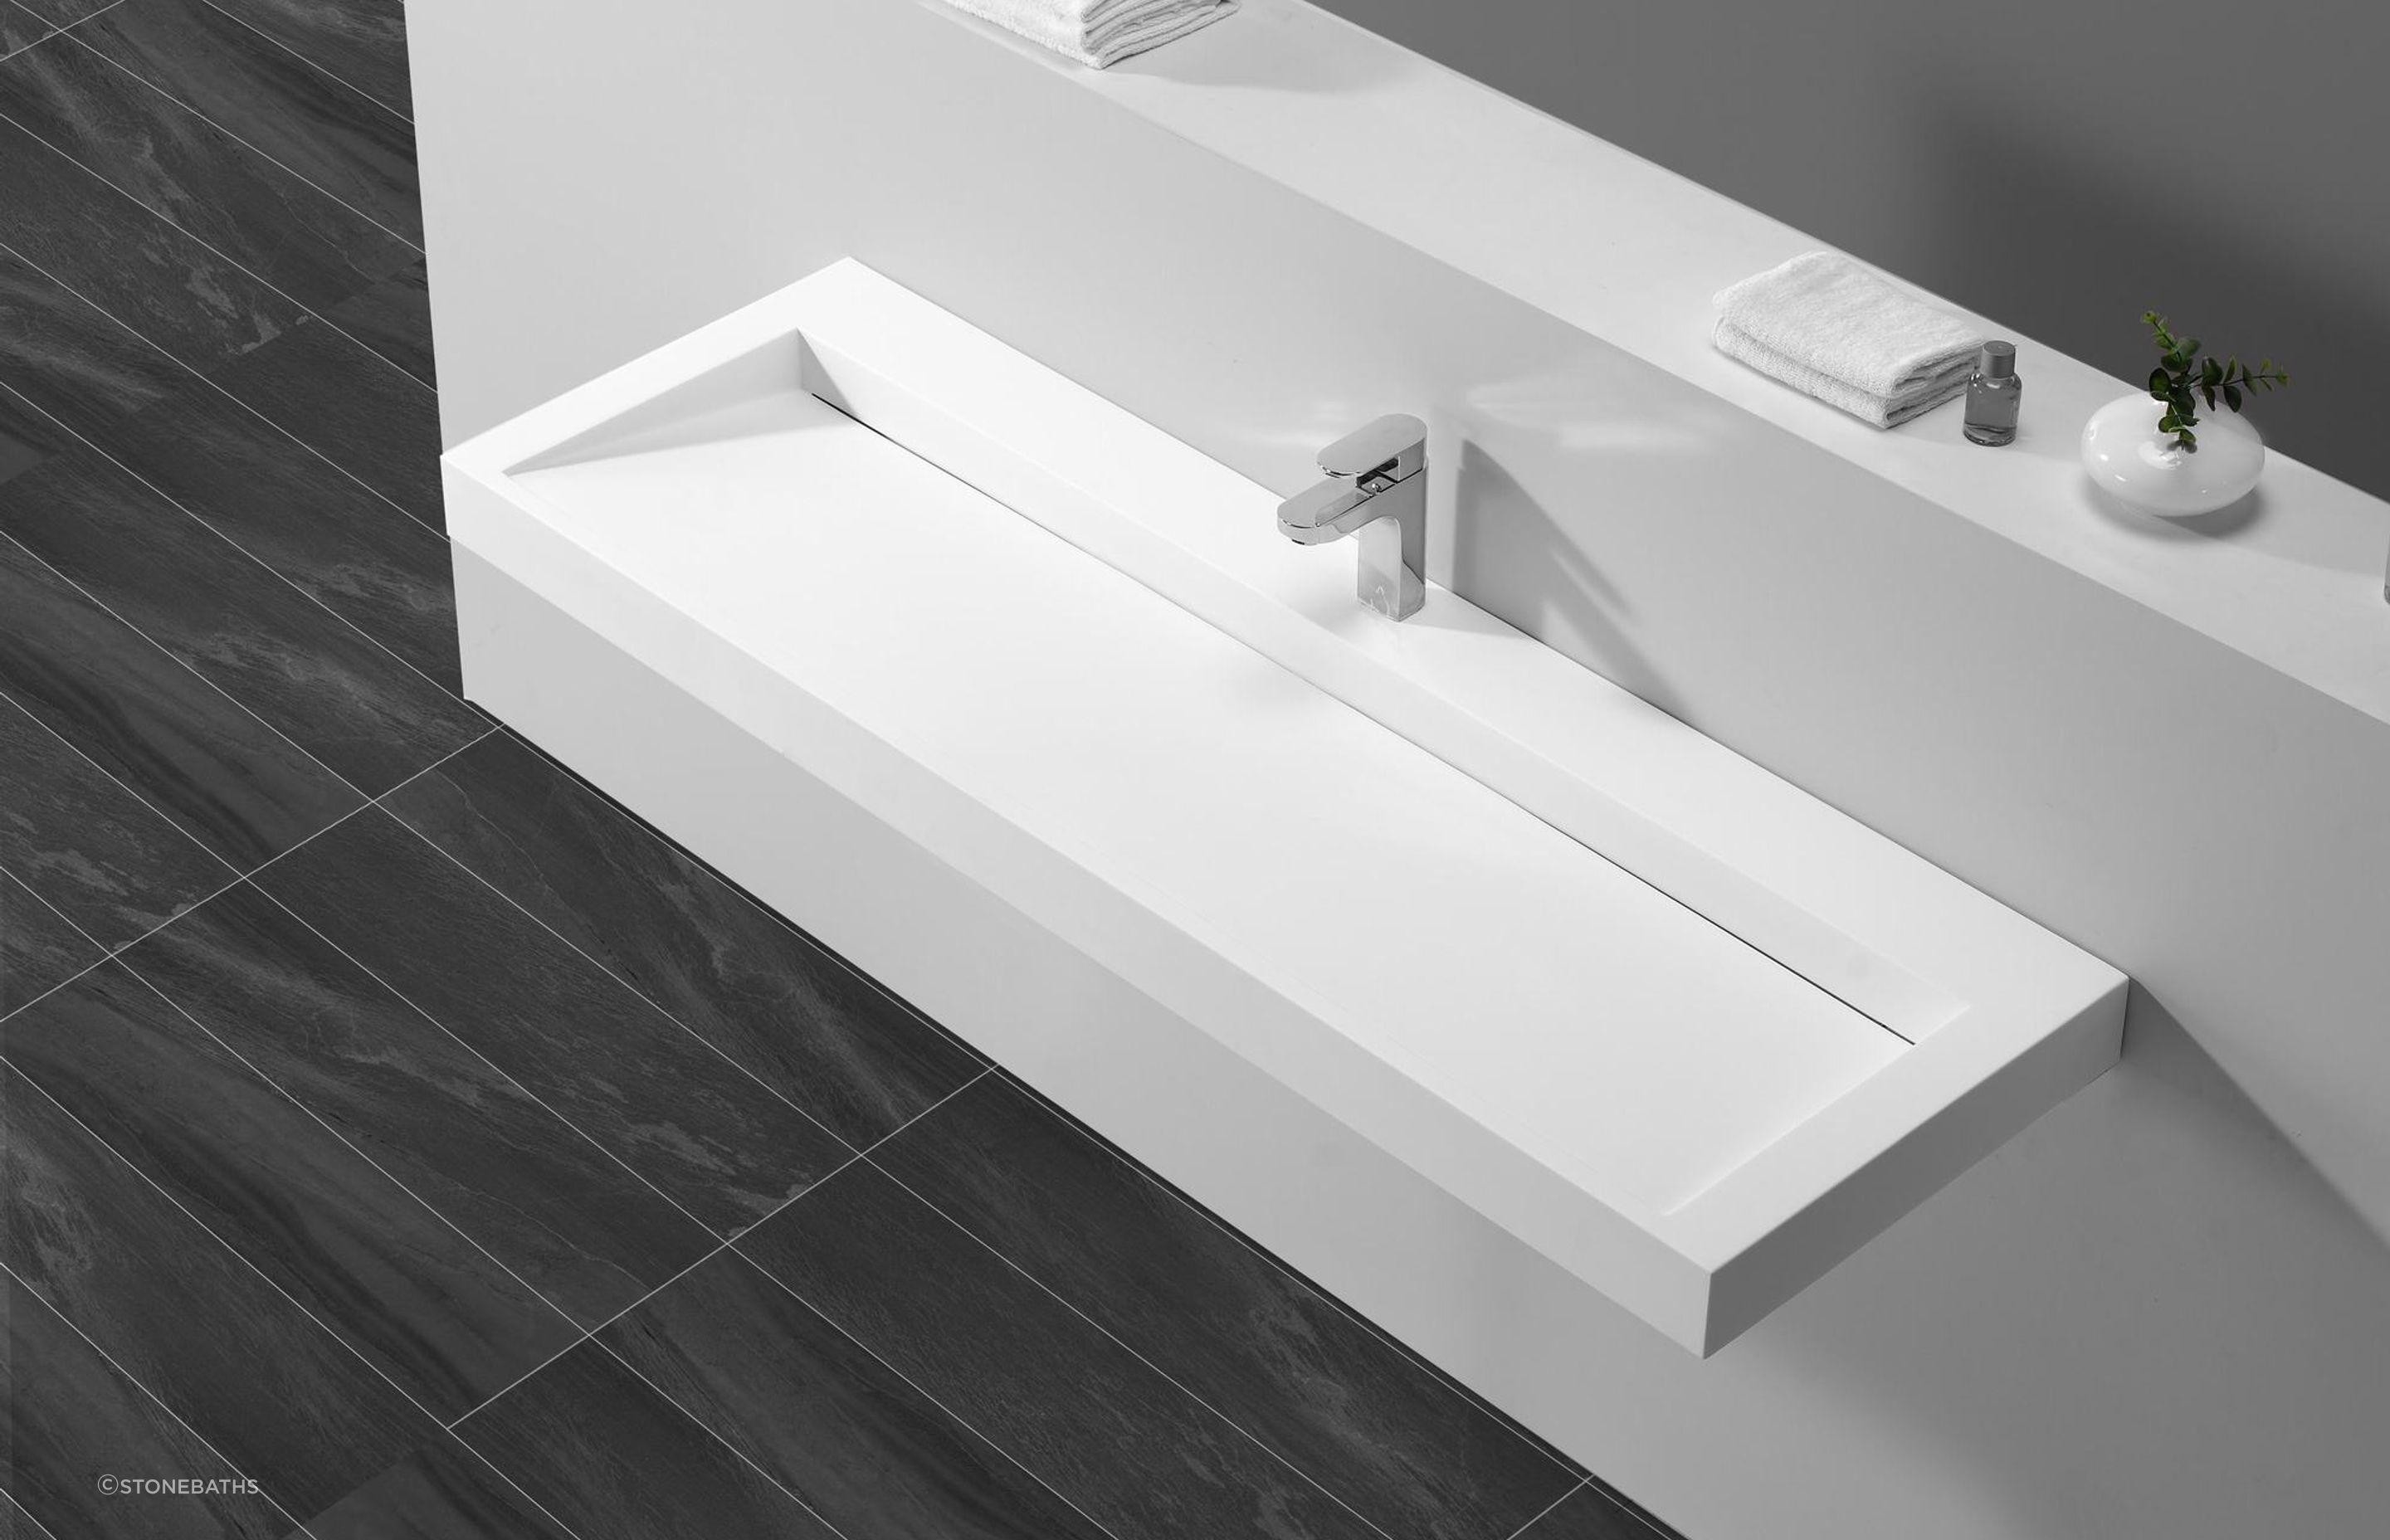 B1265-2 Wall Mounted Basin with trough styling from Stonebaths